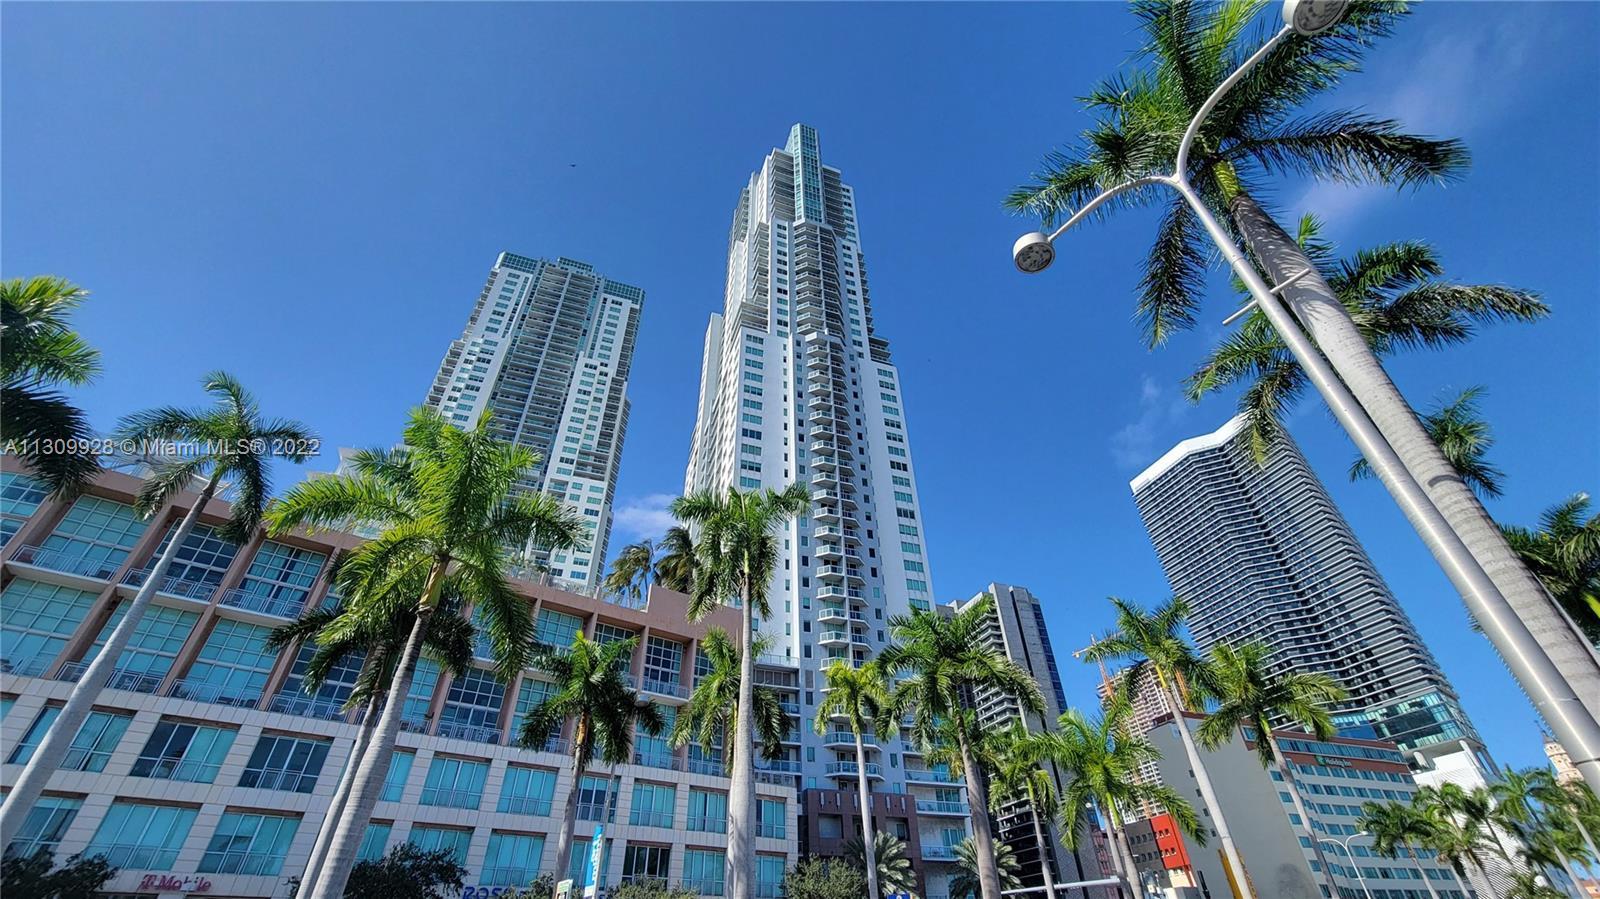 A beautiful one-bedroom condo in the BEST DOWNTOWN MIAMI location!
Enjoy the fantastic unobstructed